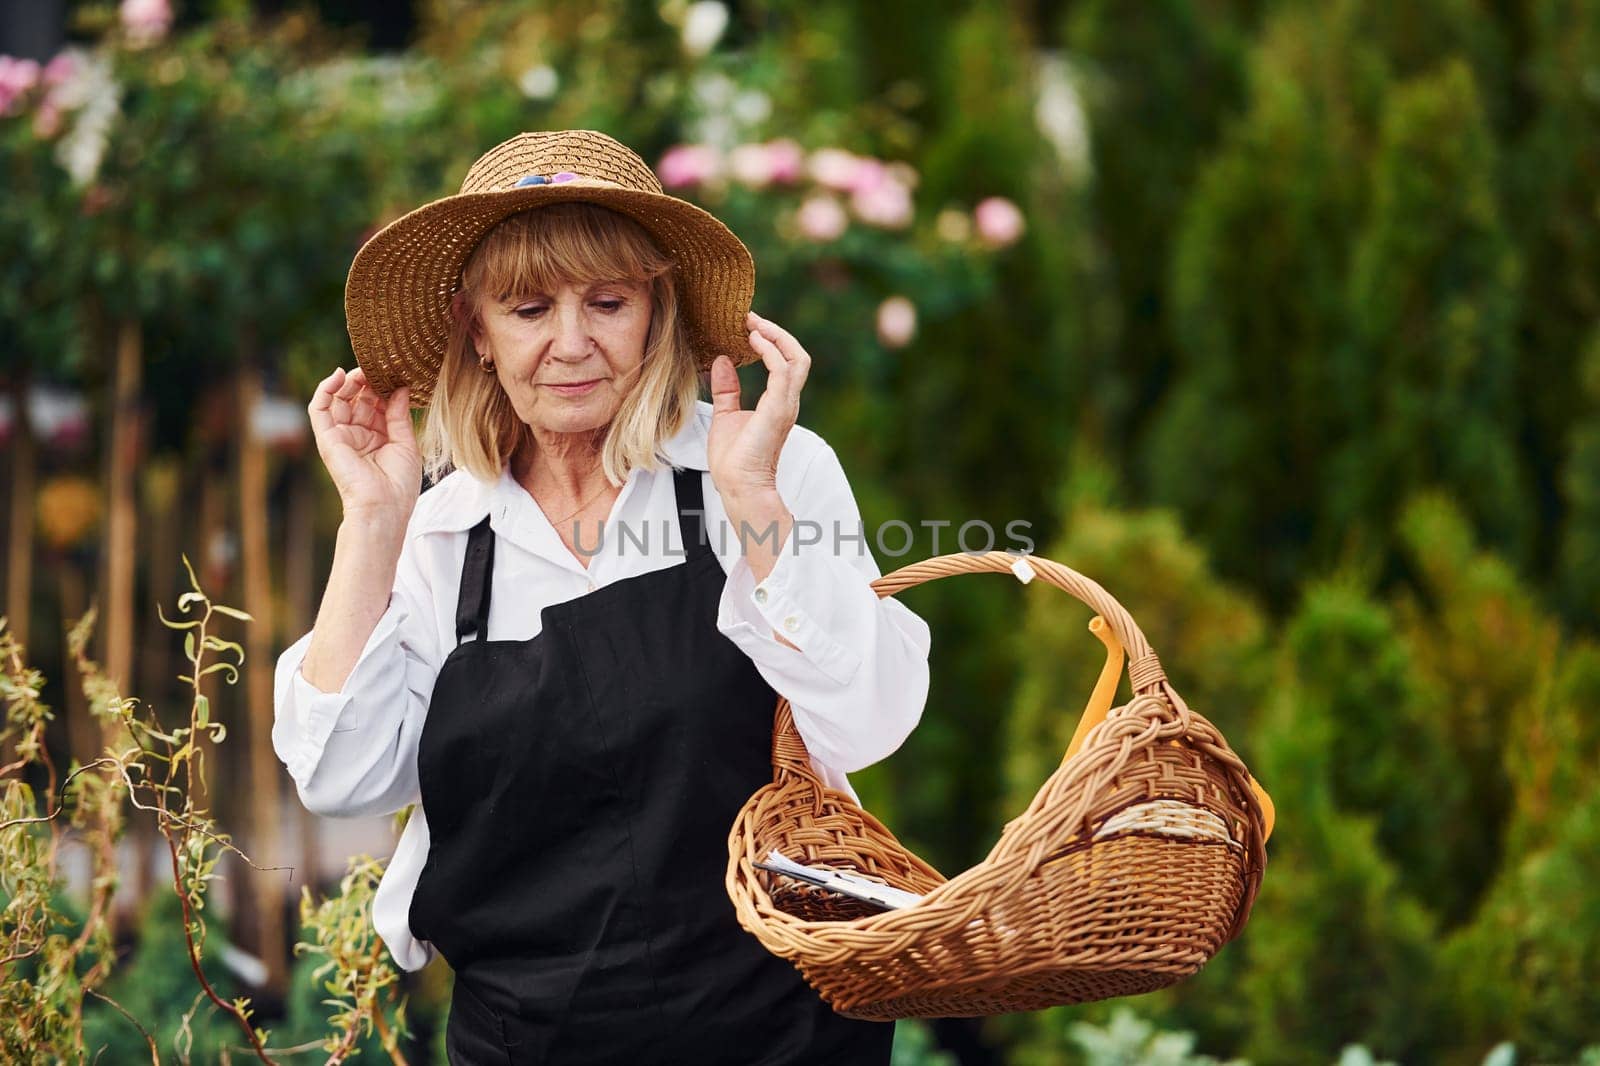 With basket in hands. Senior woman is in the garden at daytime. Conception of plants and seasons by Standret